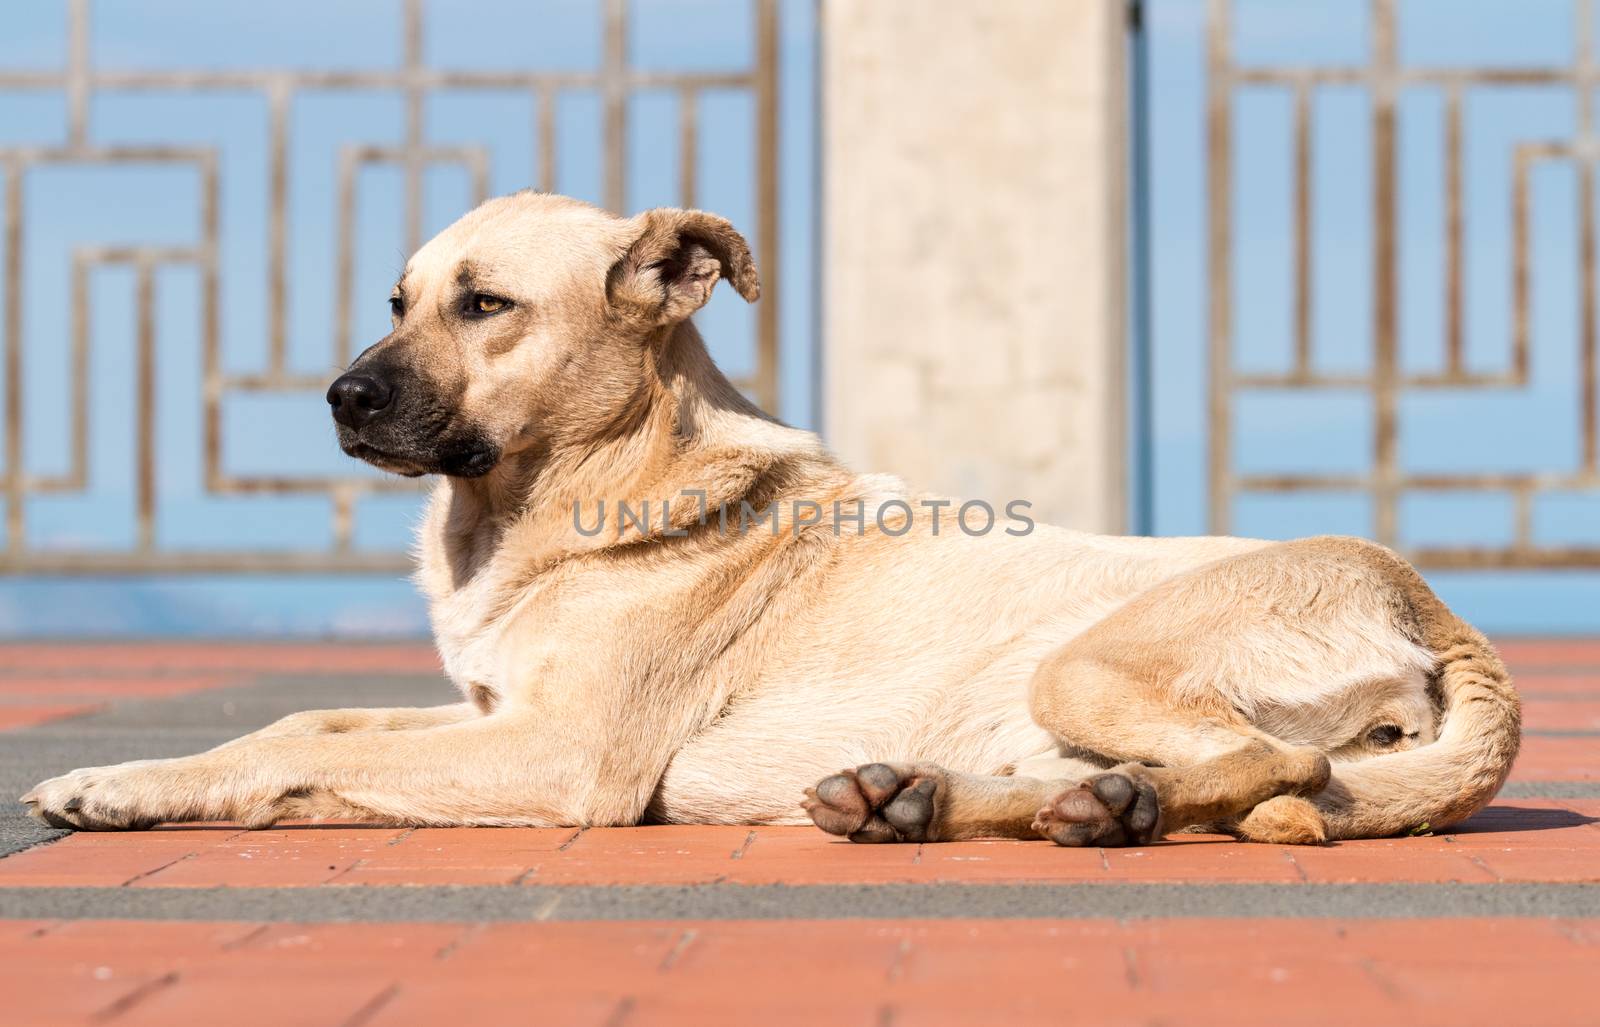 Relaxed dog